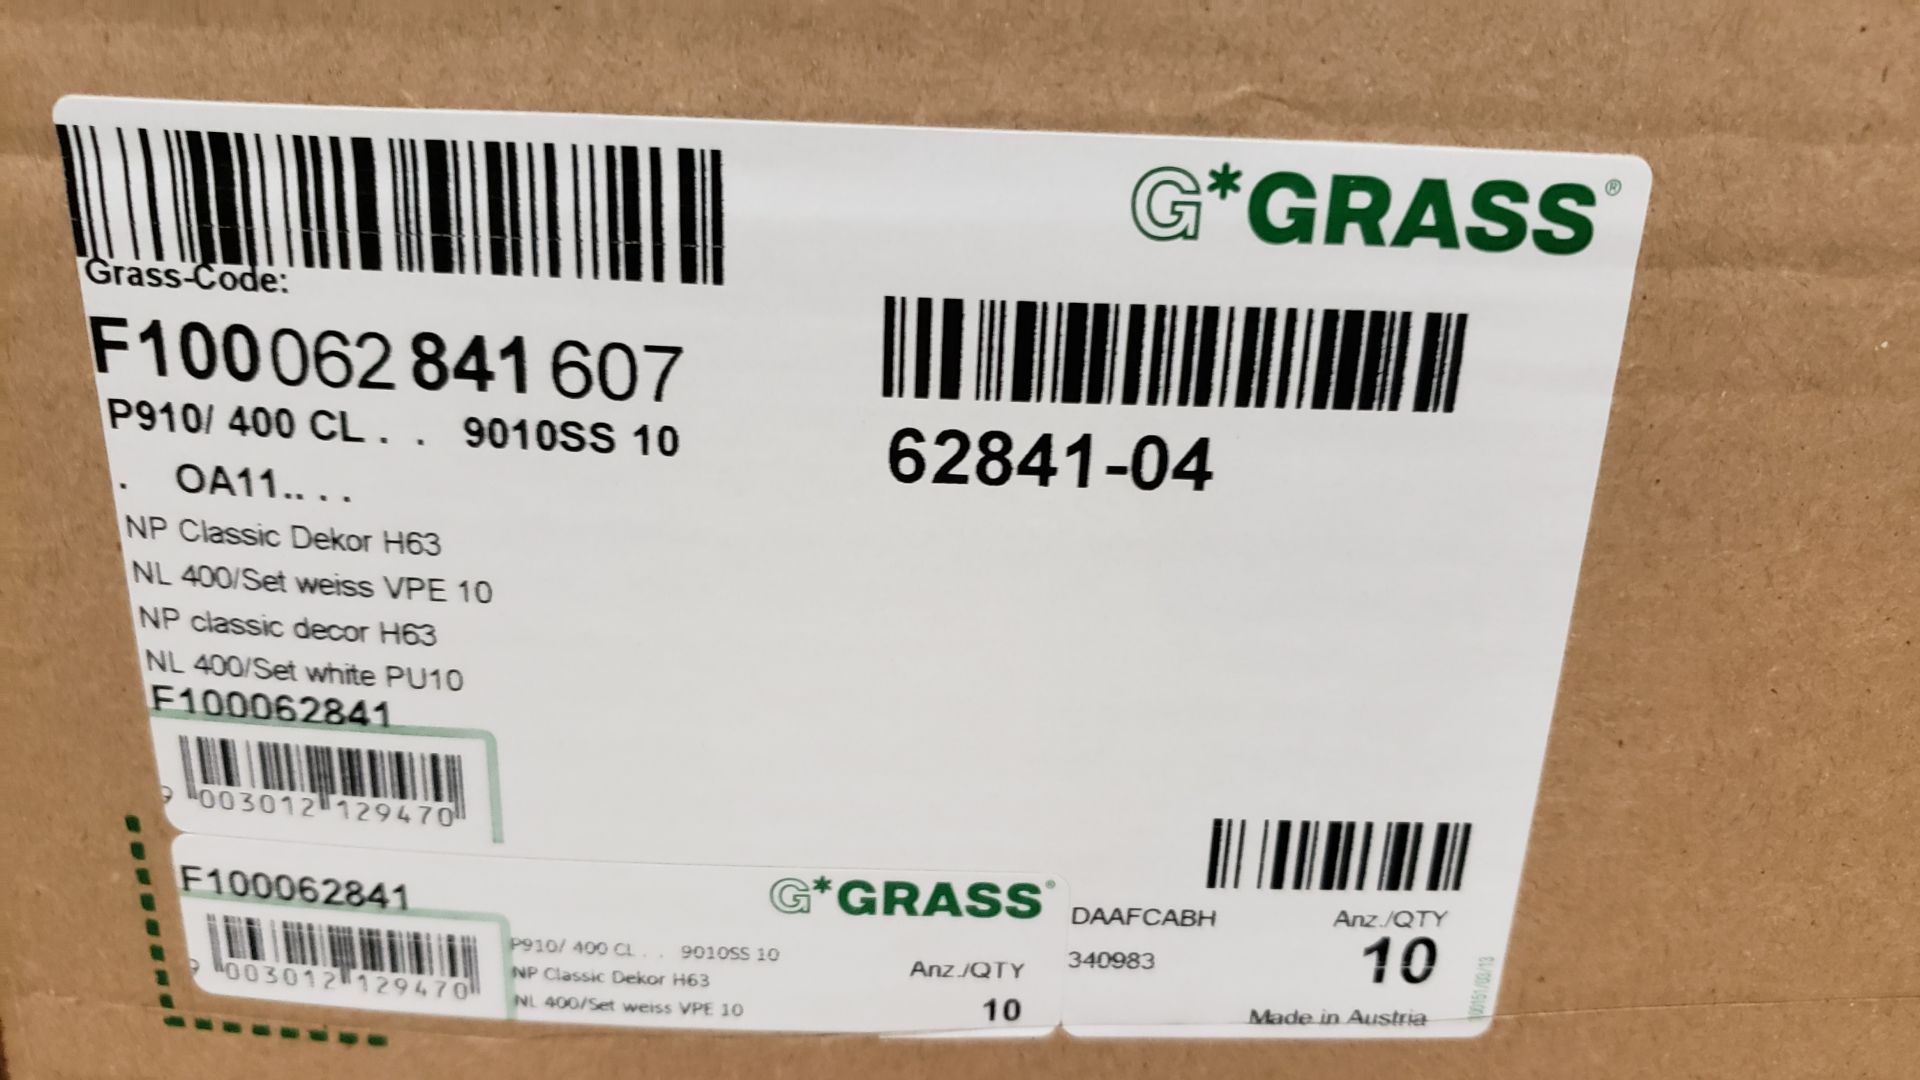 BOXES OF GRASS NP CLASSIC DÉCOR H63 NL 400/SET WHITE PU10 HARDWARE (SUBJECT TO BULK BID LOT 499A) - Image 2 of 3